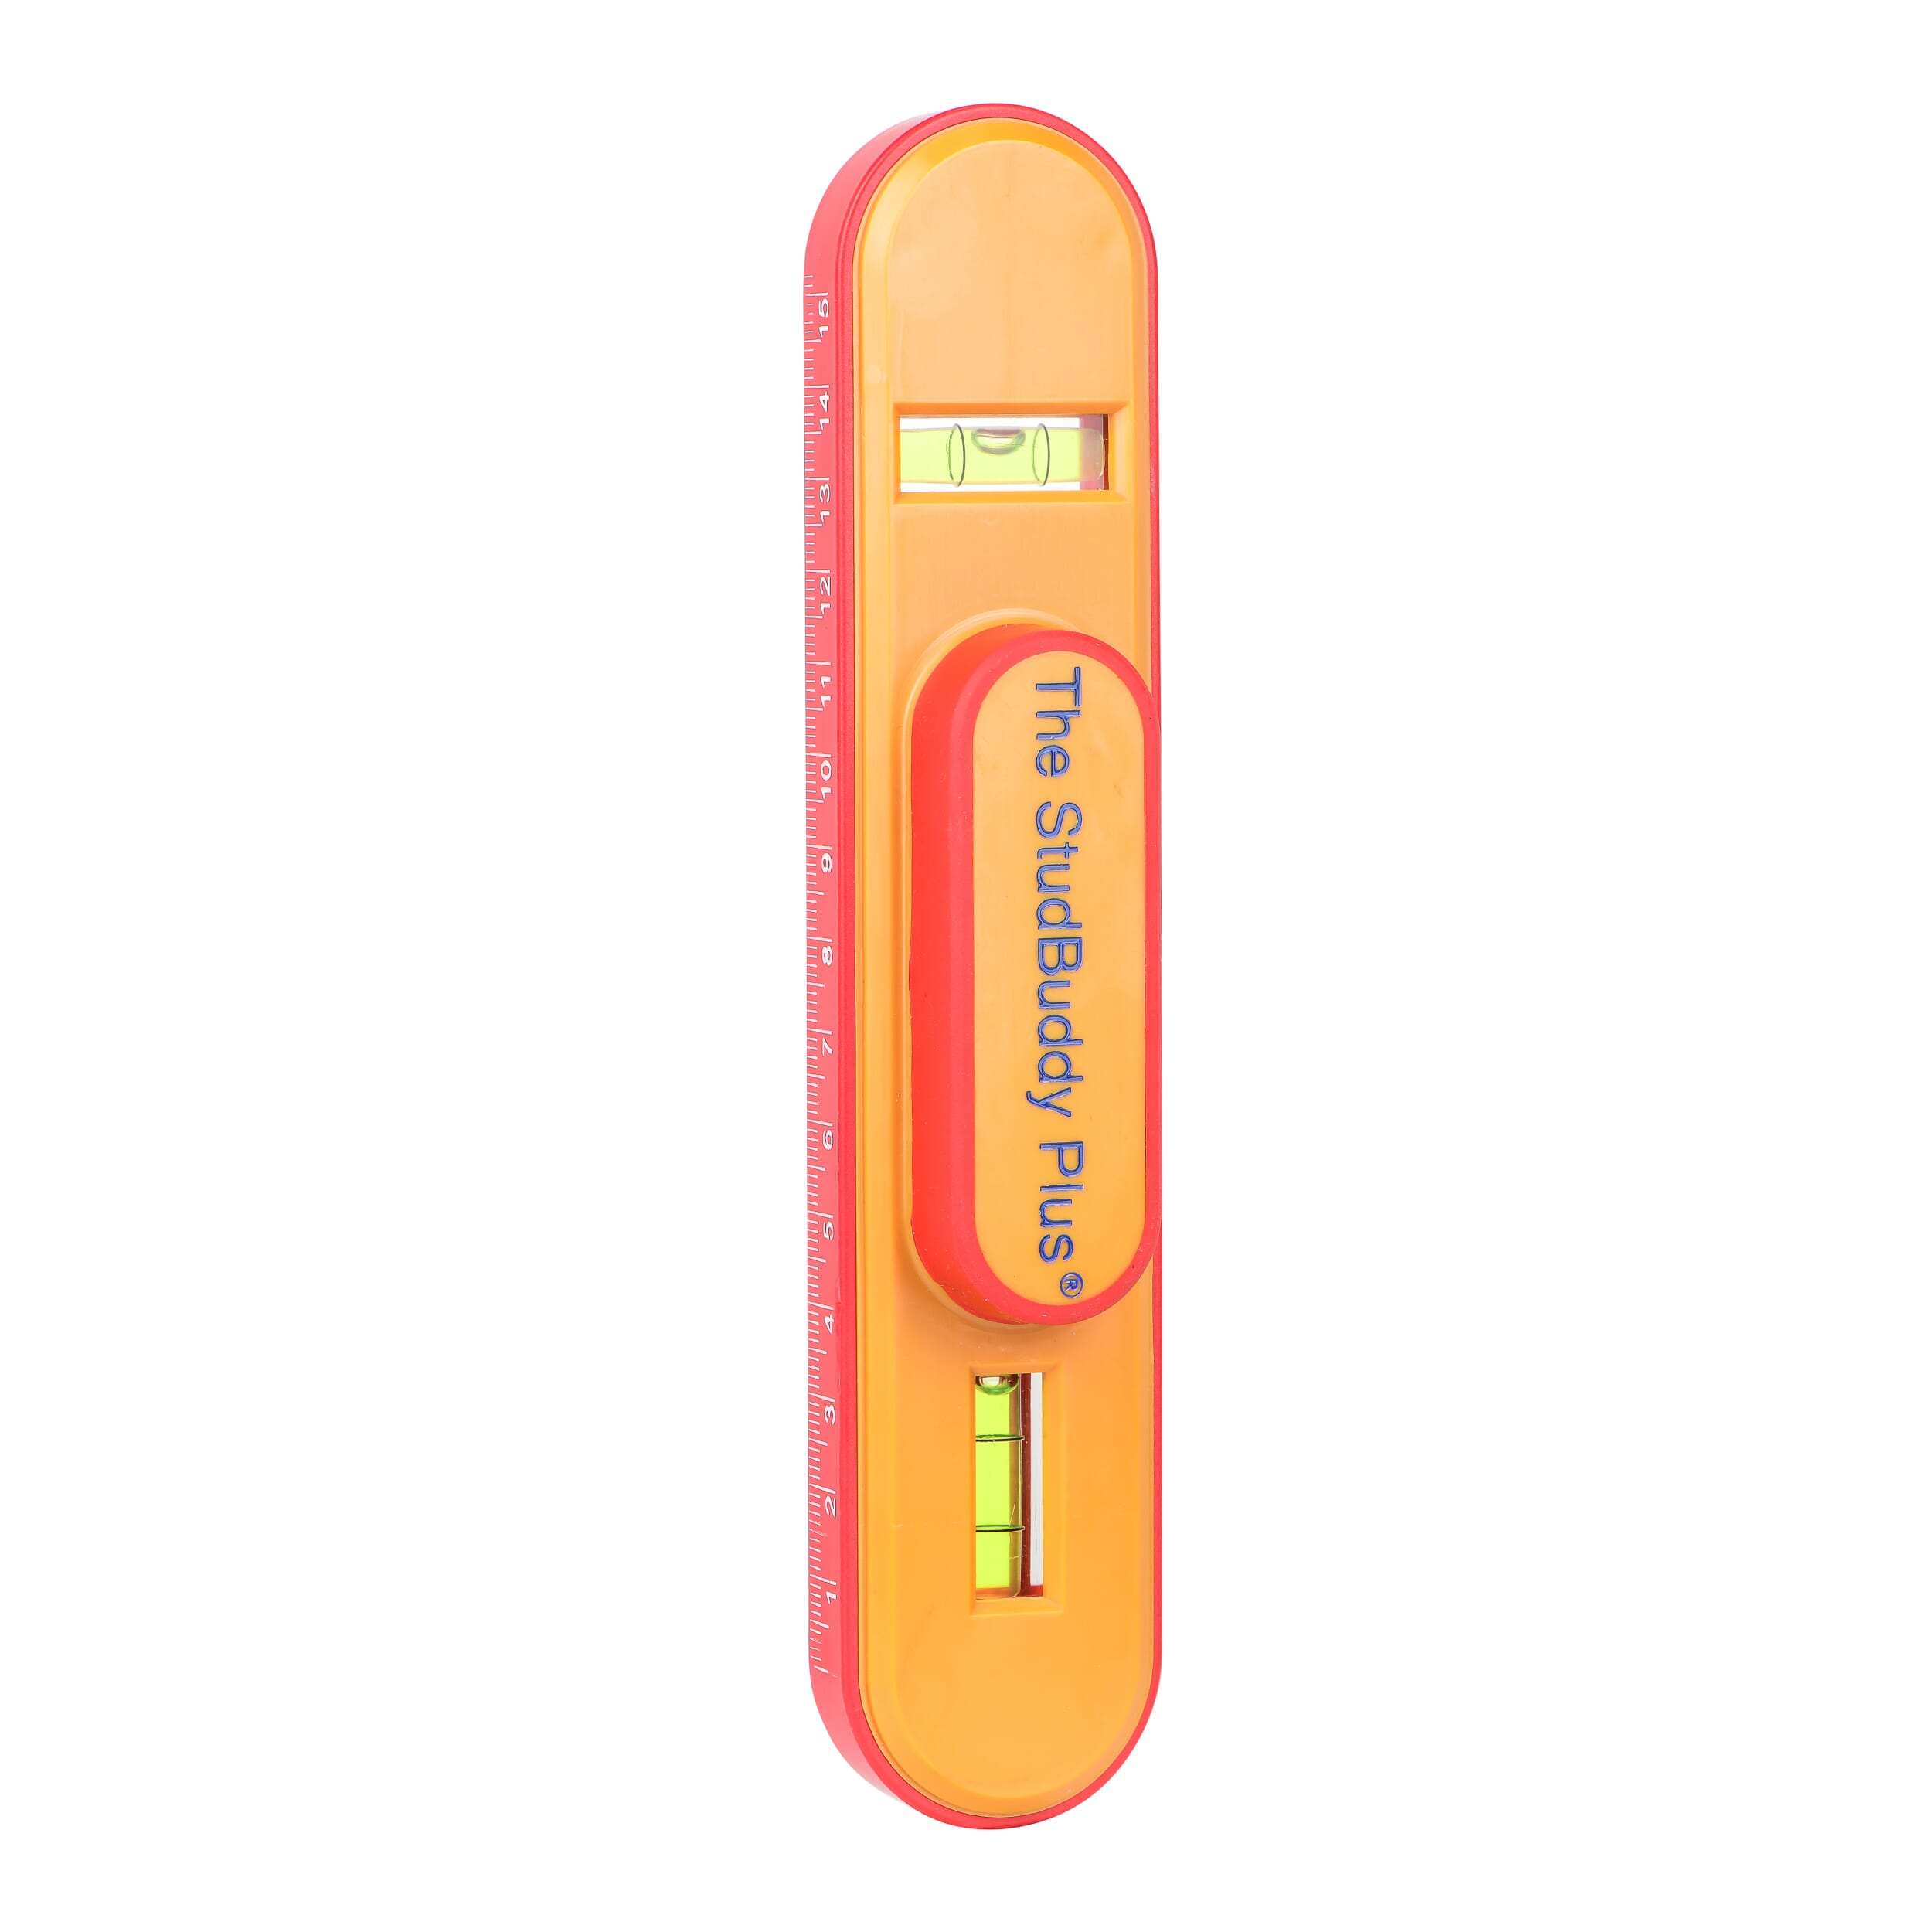 Magnetic Stud Finder - The StudBuddy Plus® - Shakespeare Solutions™